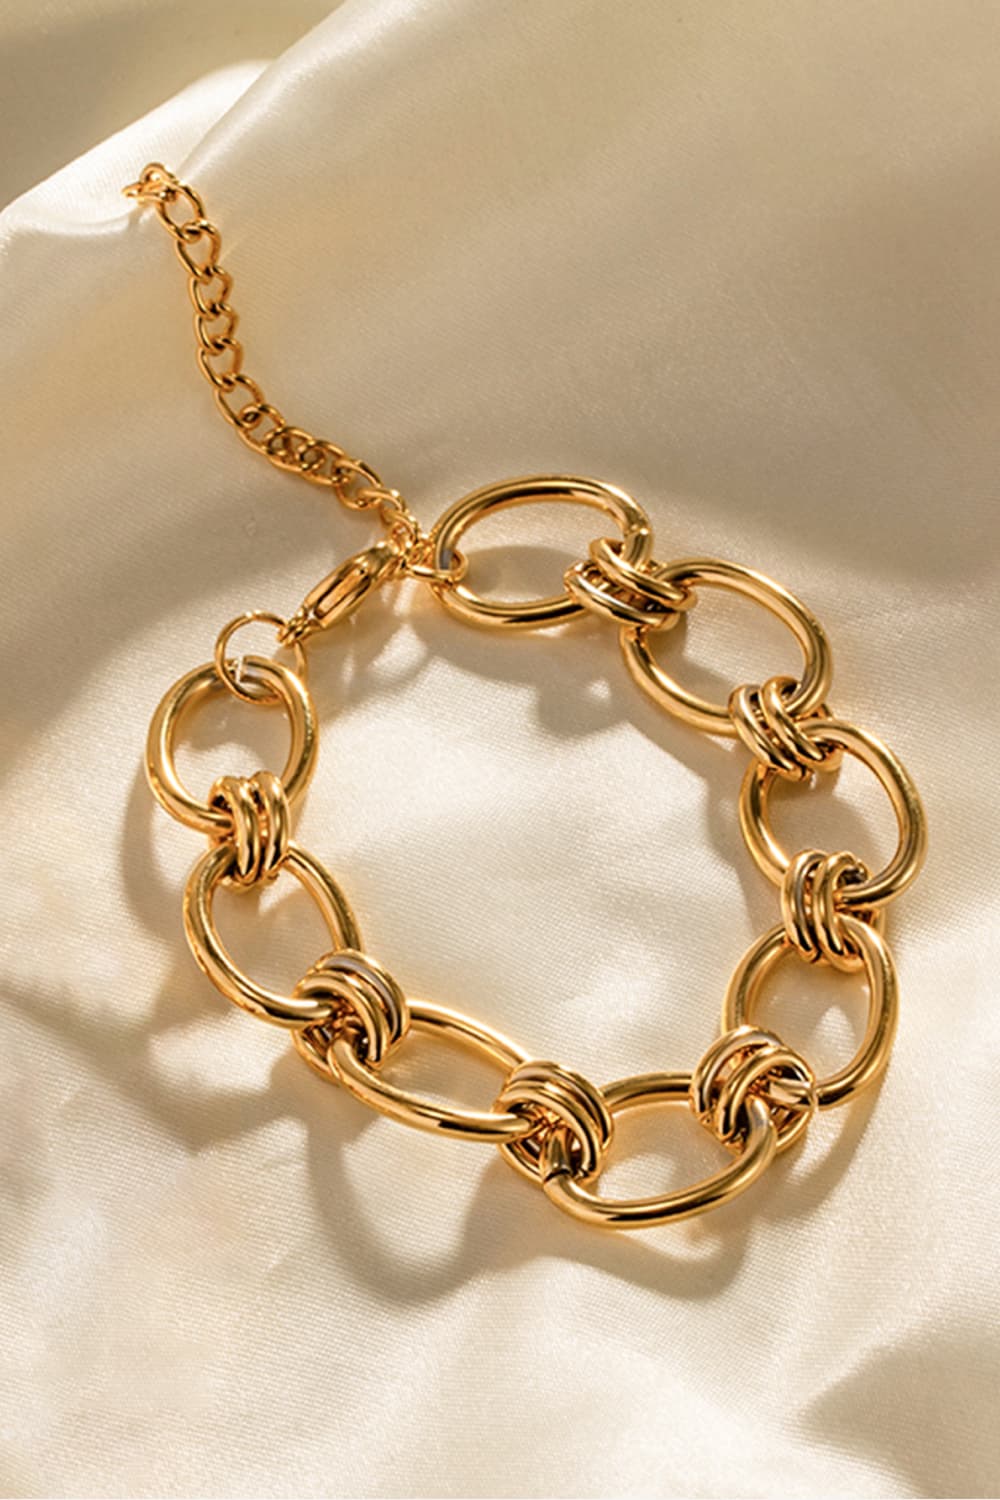 Chunky Chain Stainless Steel Bracelet - Gold / One Size - T-Shirts - Bracelets - 3 - 2024